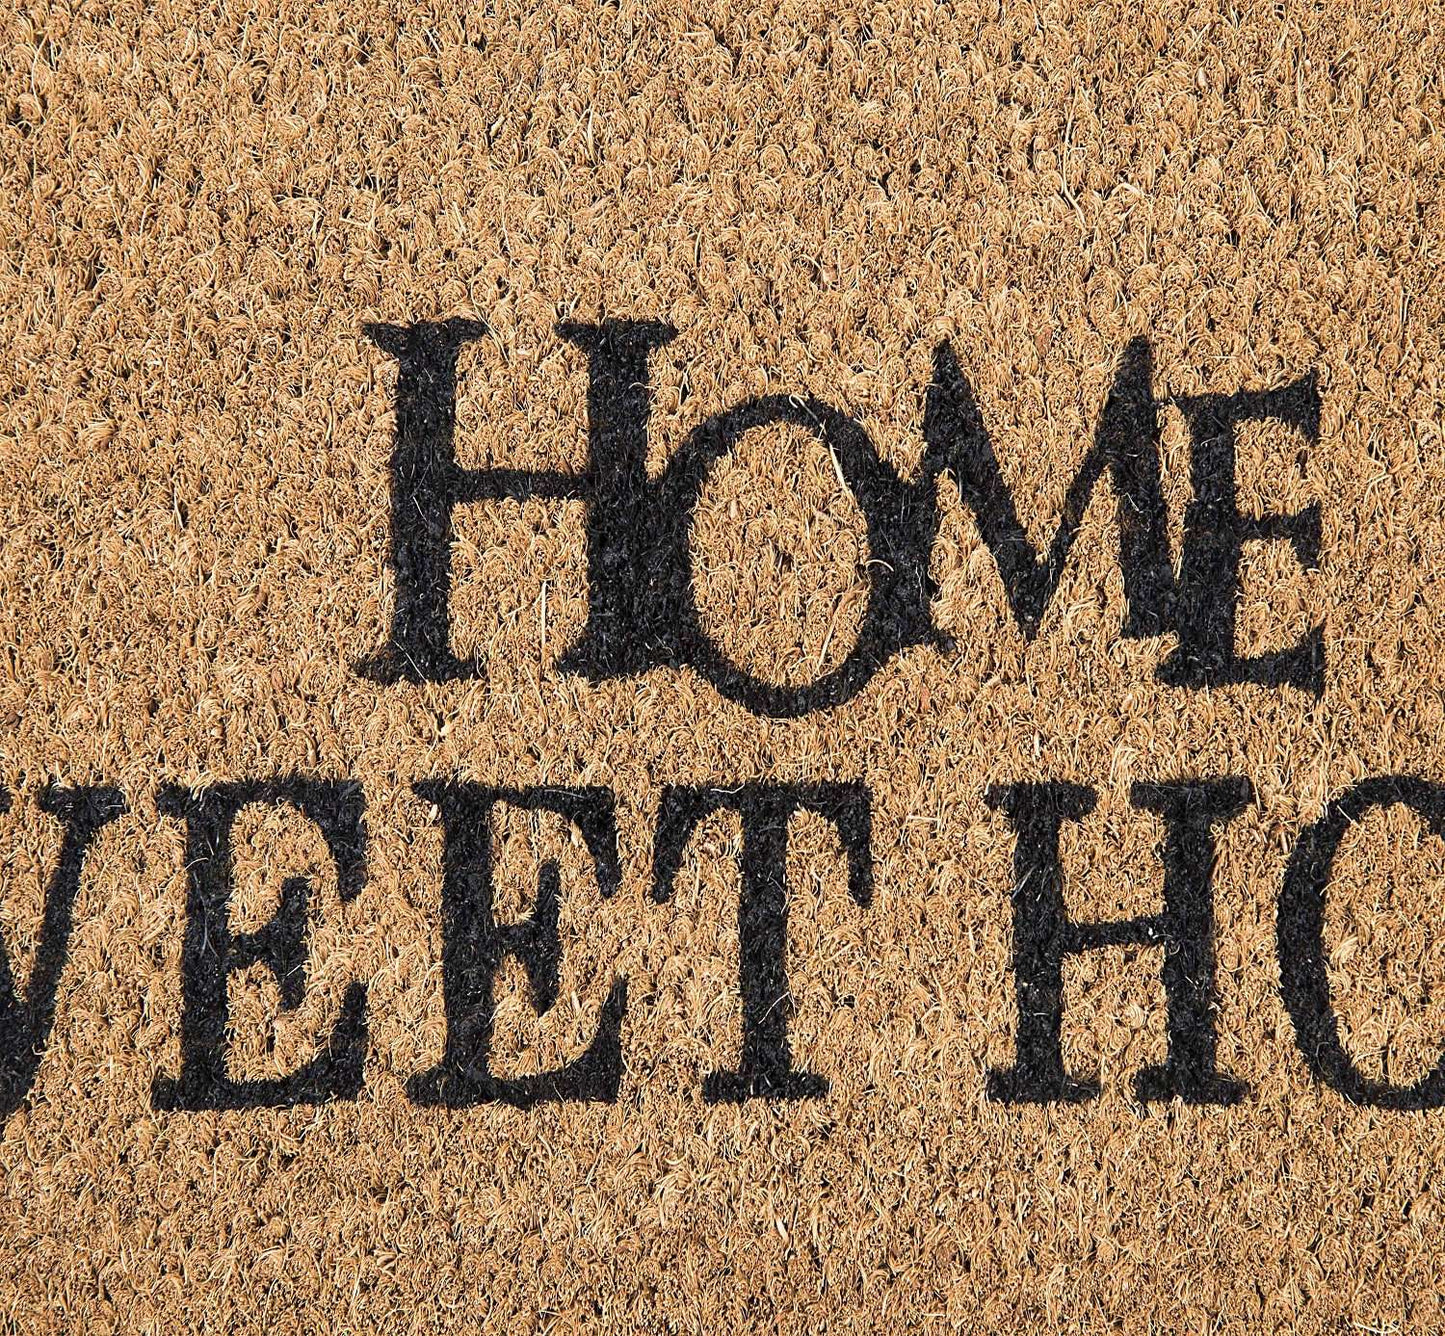 SWHF Premium Coir and Rubber Quirky Design Door and Floor Mat : Home Sweet Home - SWHF